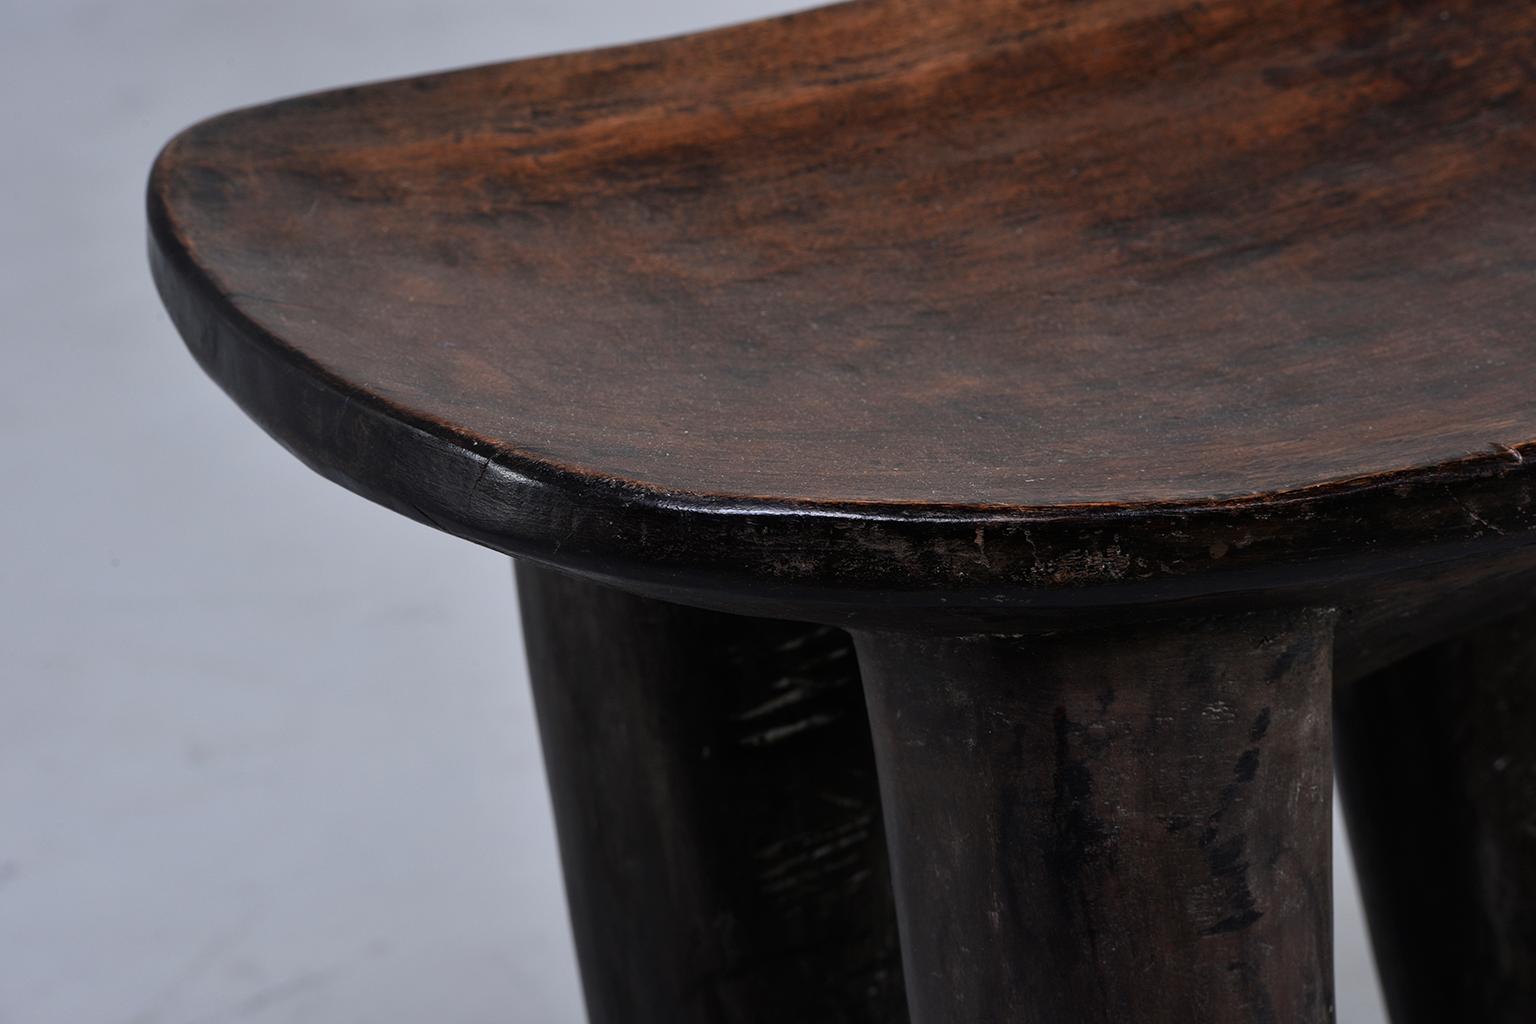 Ivorian Senufo Hand Carved Side Table or Stool